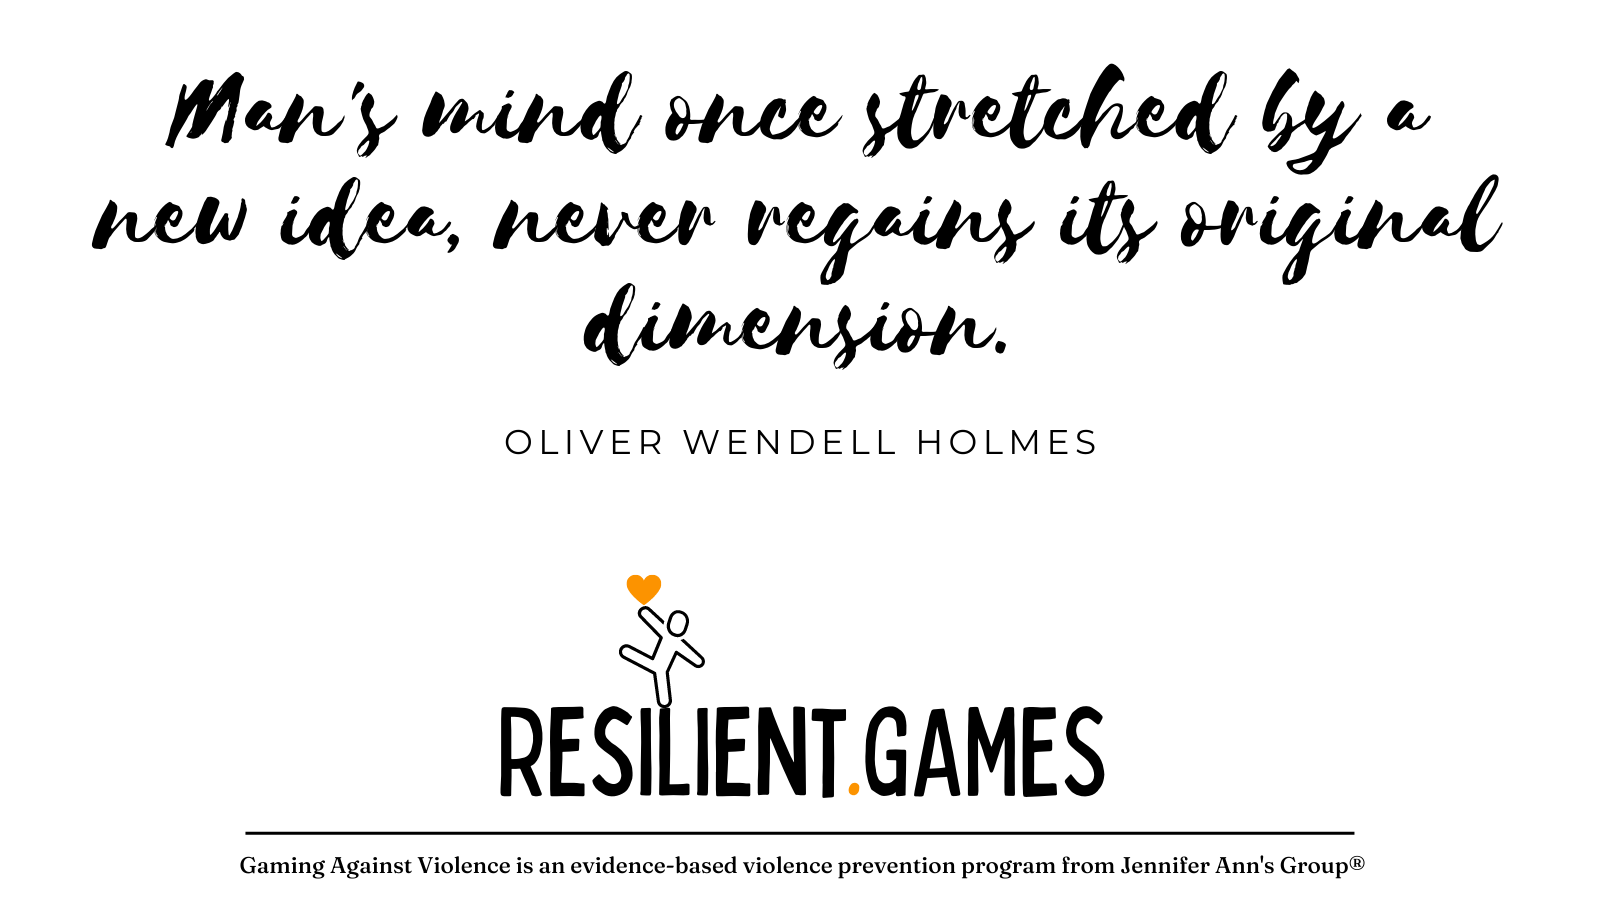 Man's mind once stretched by a new idea, never regains its original dimension. ~Oliver Wendell Holmes